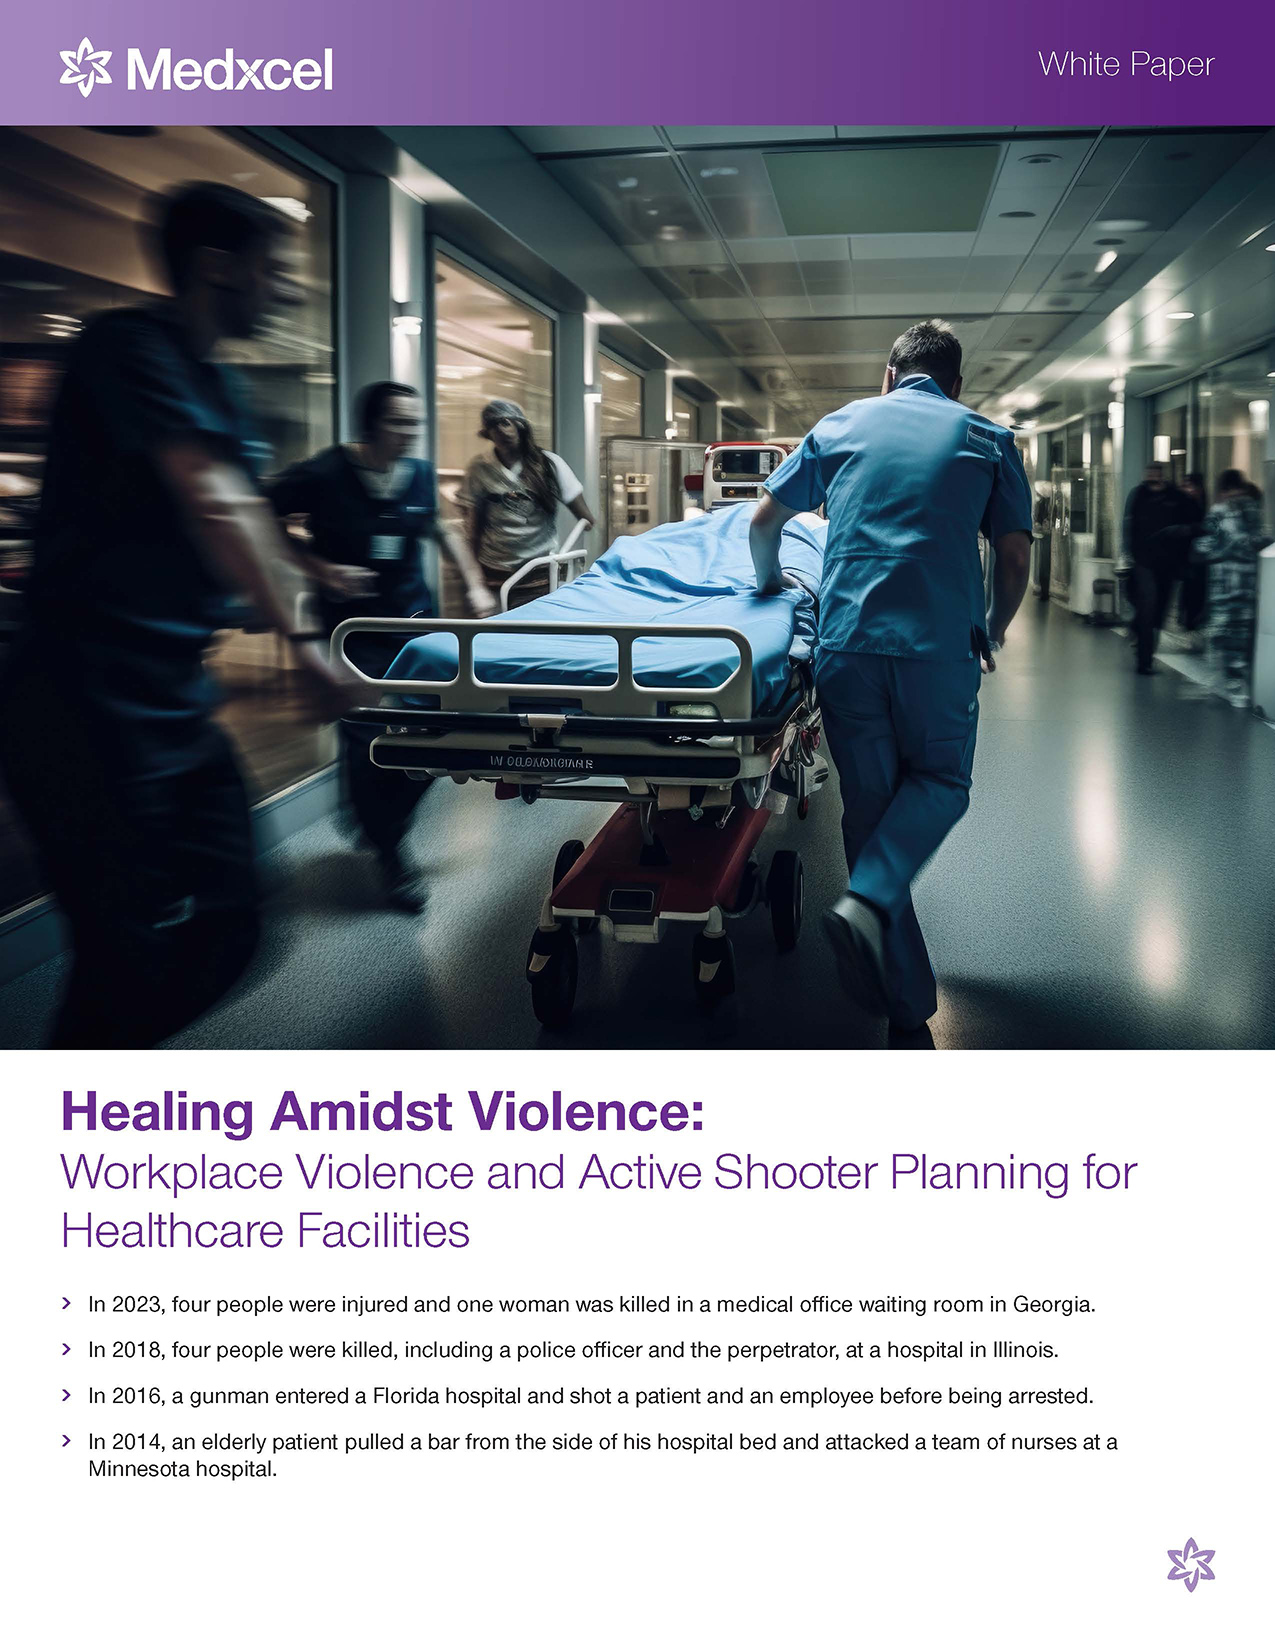 Download Healing Amidst Violence: Workplace Violence & Active Shooter Planning for Healthcare Facilities Whitepaper